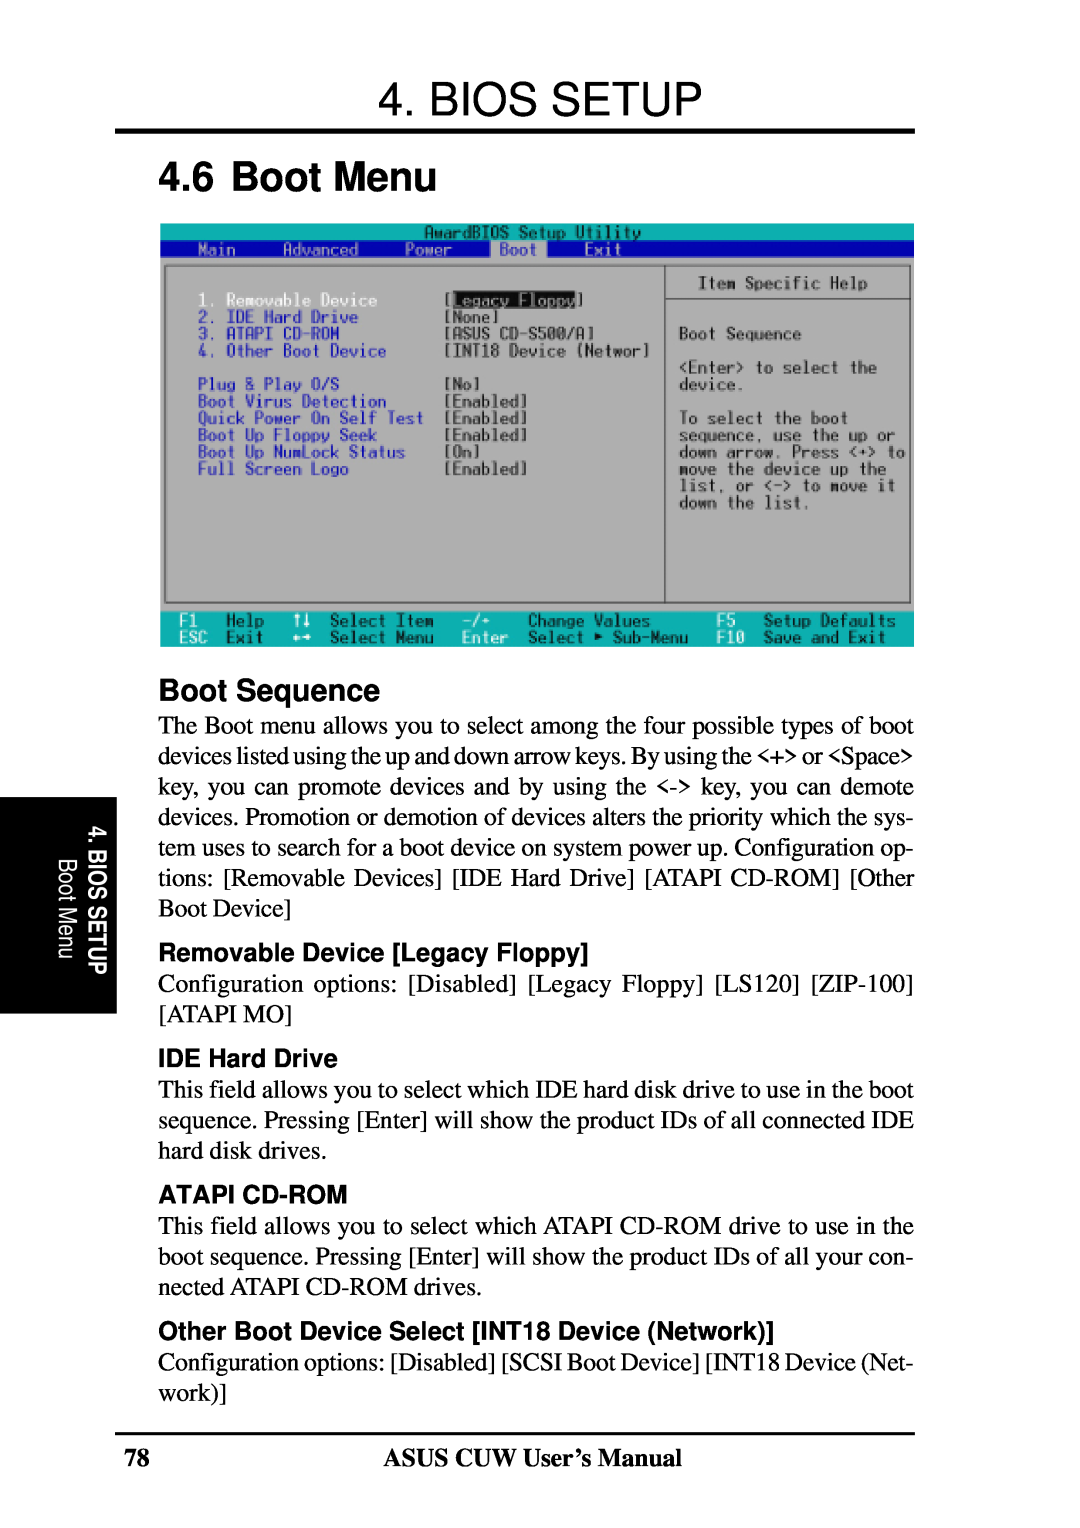 Asus 810 user manual Boot Menu, Boot Sequence, Removable Device Legacy Floppy, IDE Hard Drive, Atapi Cd-Rom, Bios Setup 